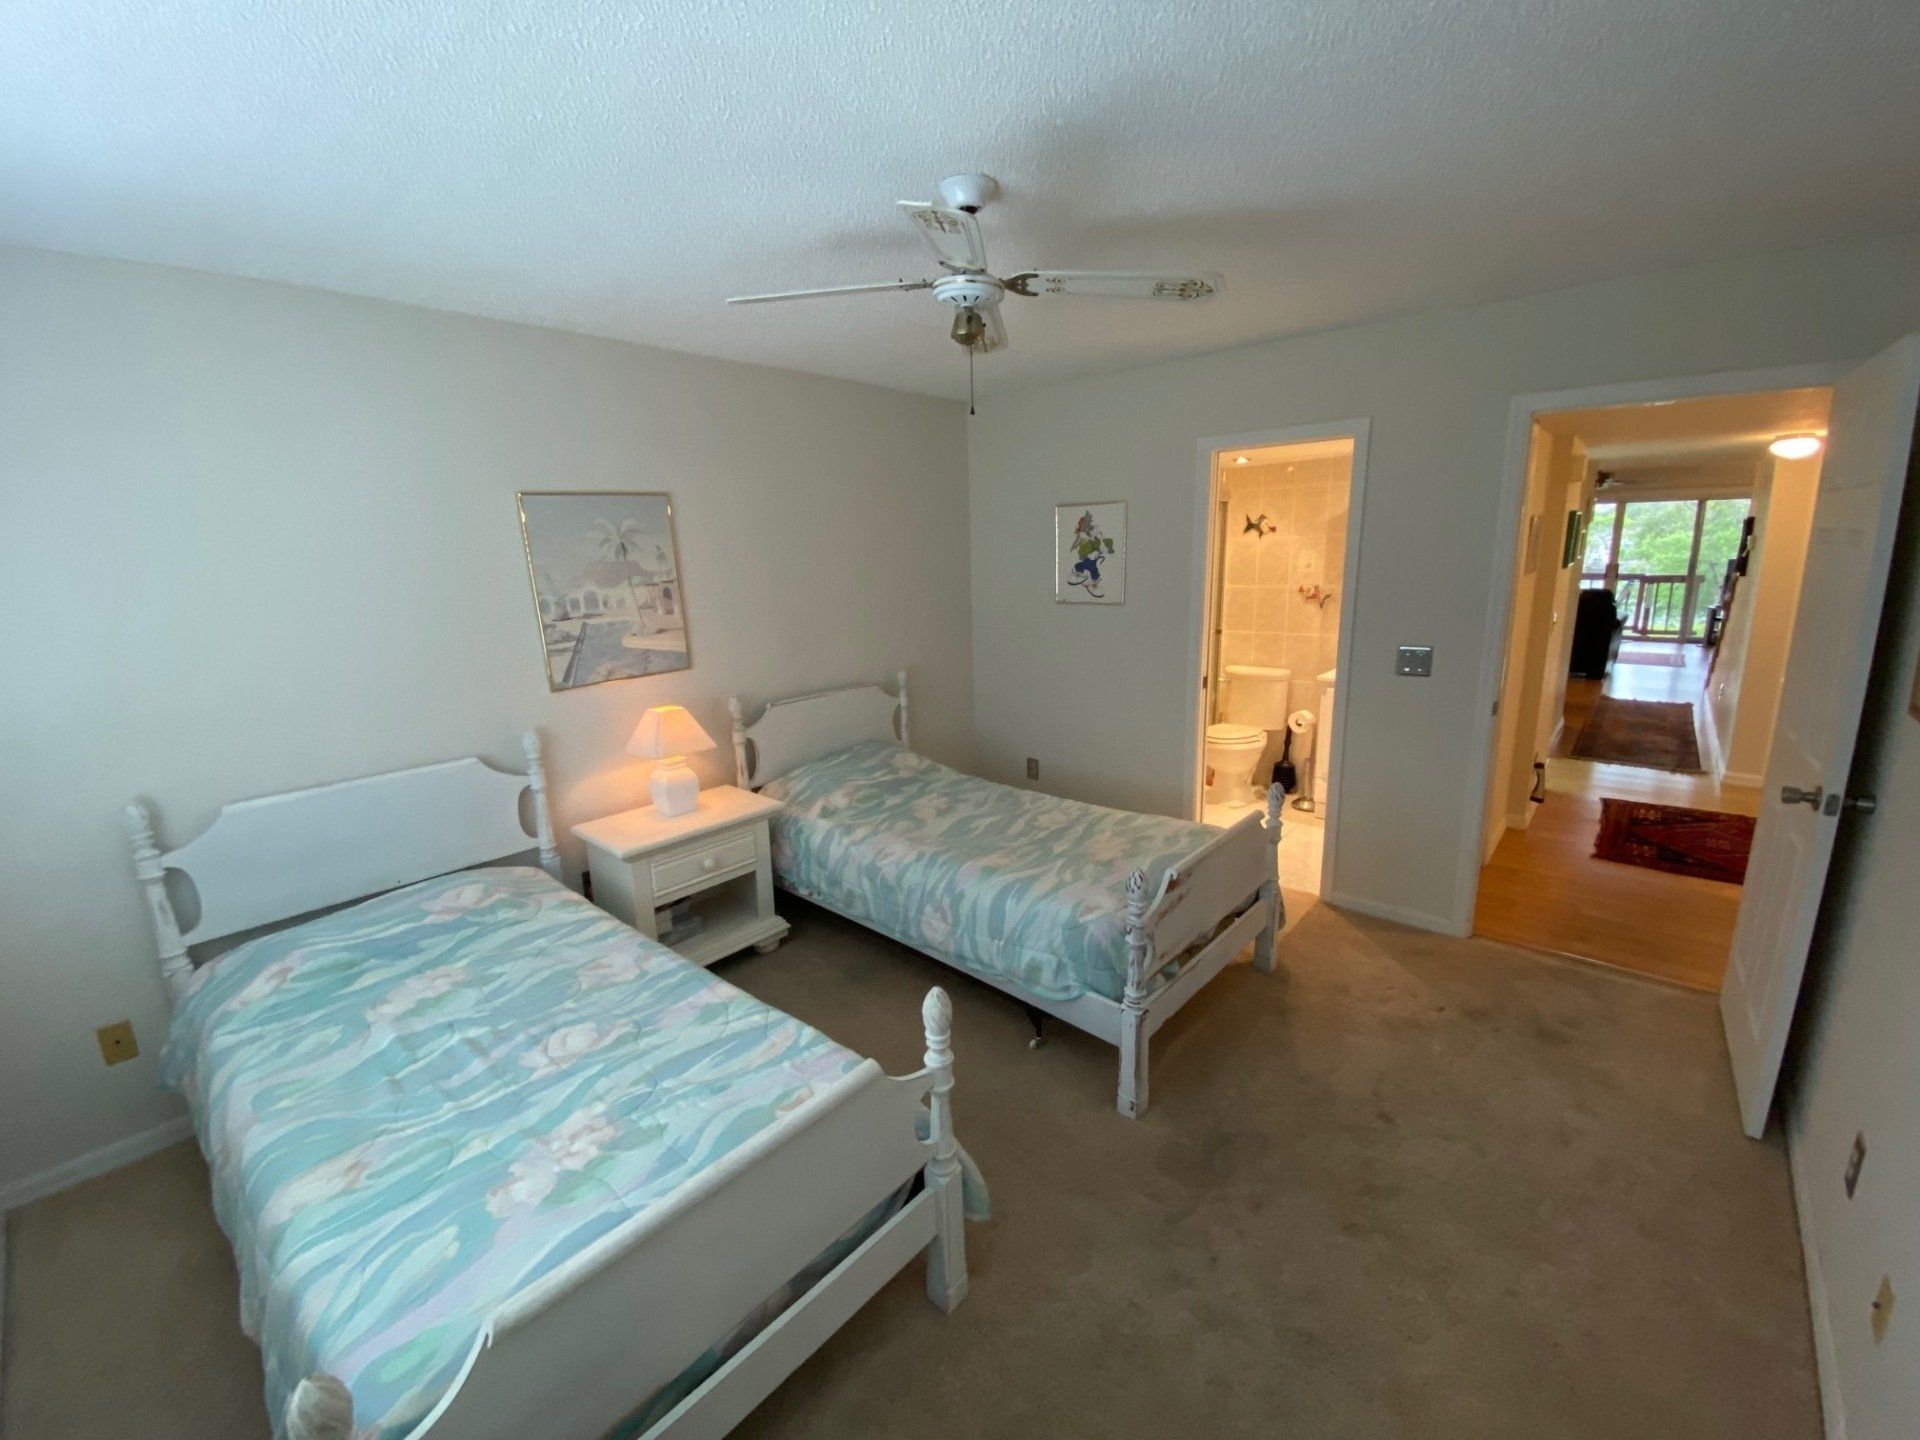 2 twin beds, white frames, blue bed covers, side table with lamp, beige carpet